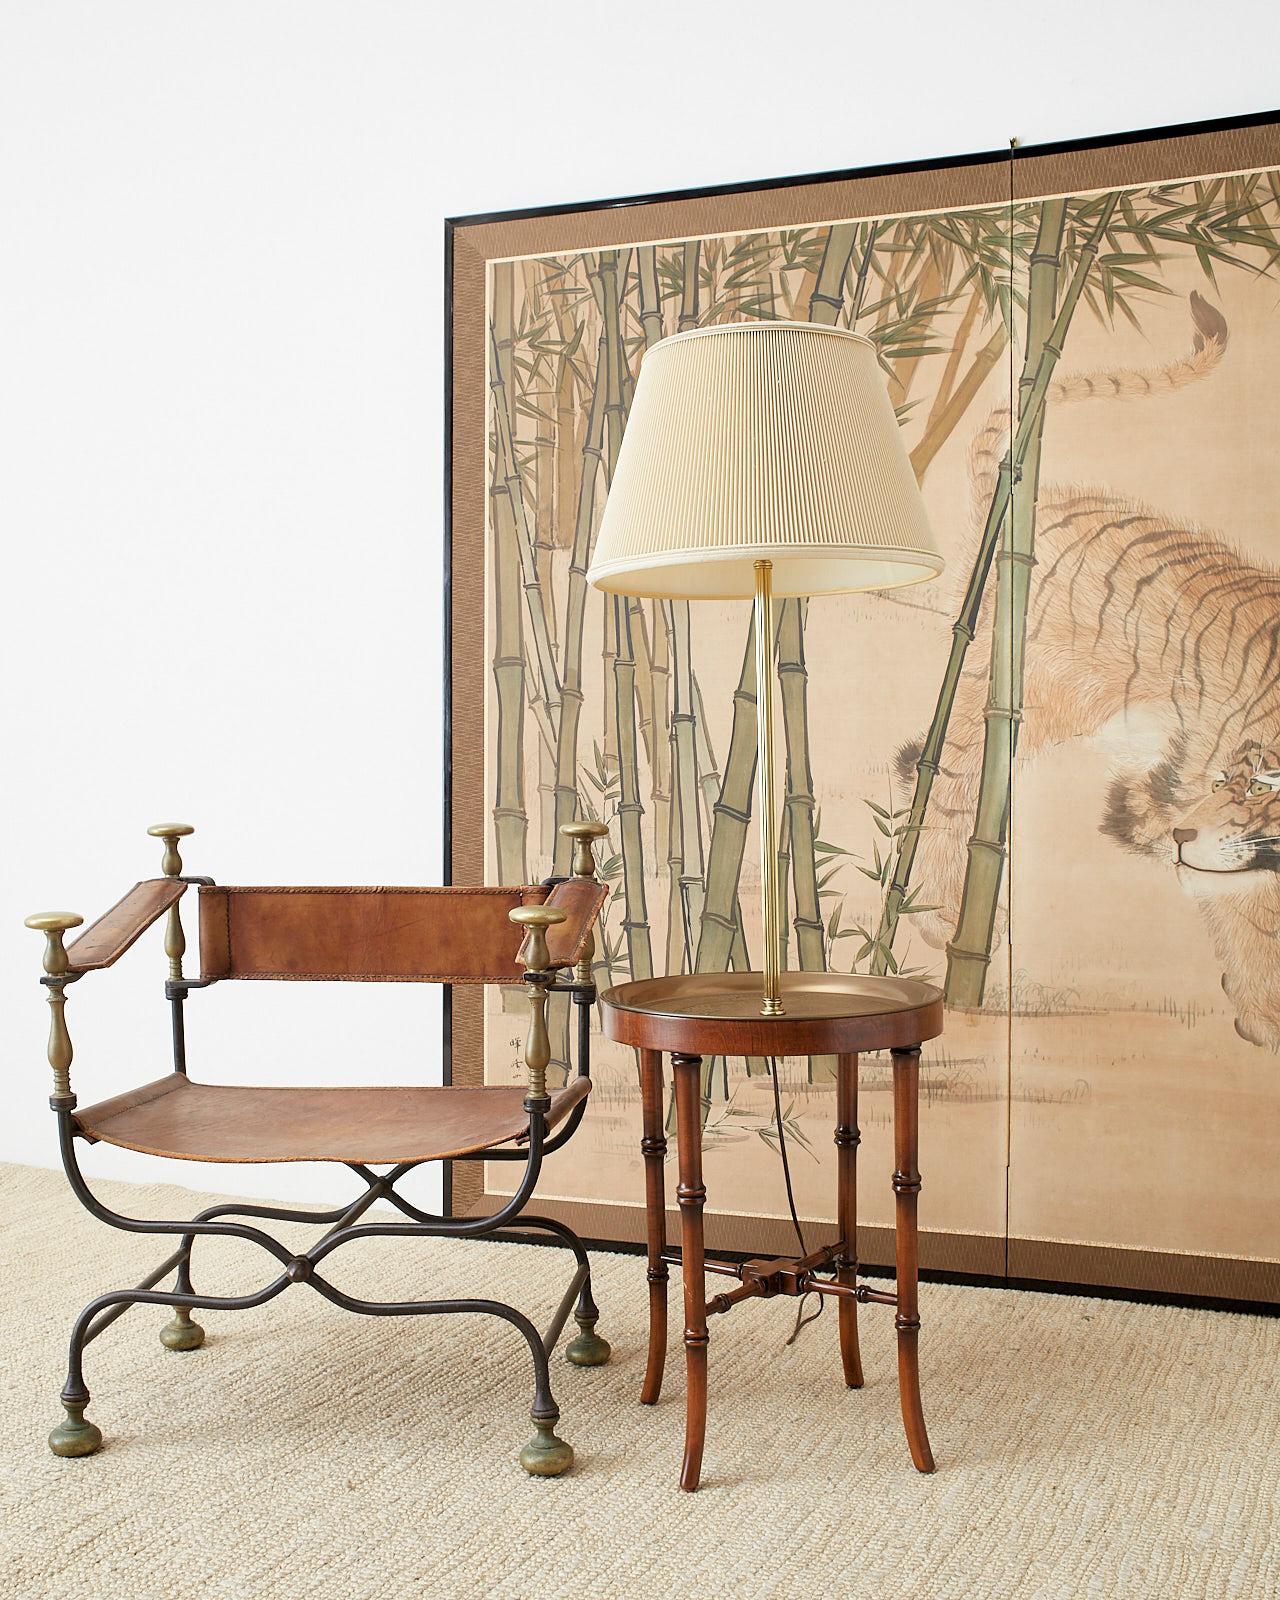 Asian inspired faux bamboo floor lamp by Frederick Cooper features etched brass tray table with a Chinese scene surmounted by a tall brass fluted column with a shade. Supported by a carved wood faux bamboo base having four legs conjoined with a